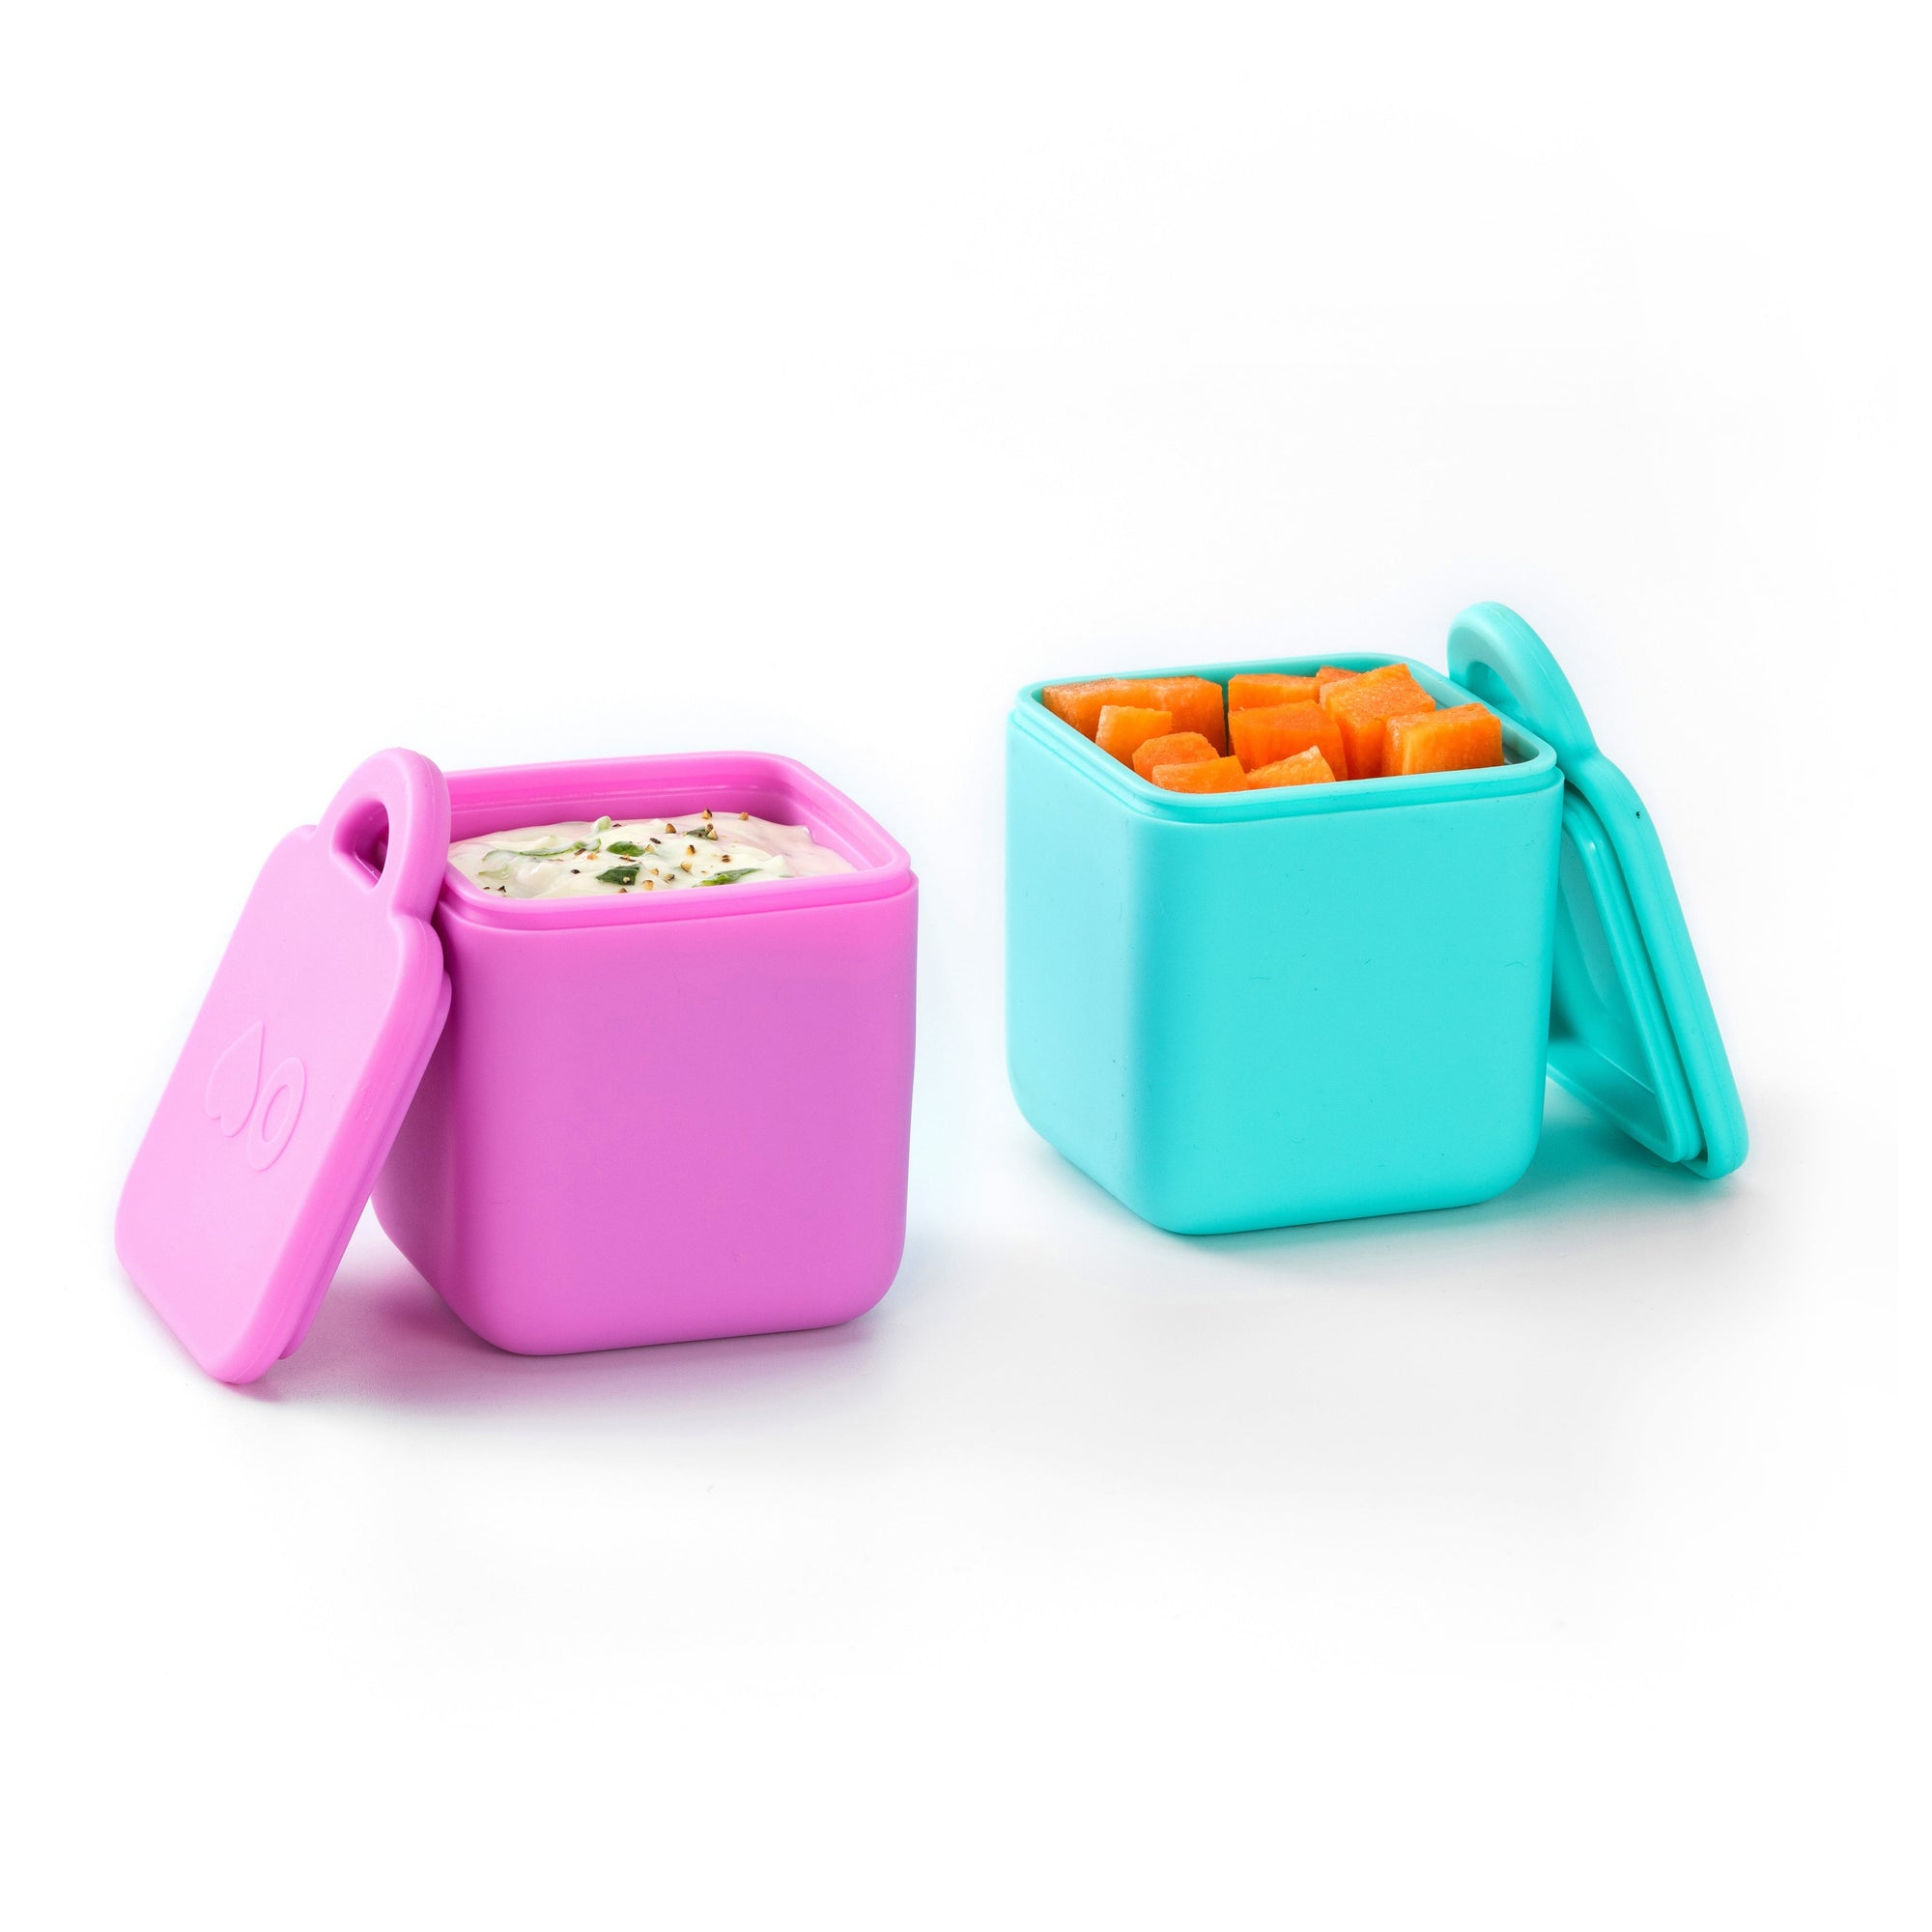 https://cdn.shopify.com/s/files/1/0523/9145/files/omielife-omiedips-select-colour-the-omiedips-is-for-v2-omieboxes-only-pink-teal-omiedips-bento-accessories-omielife-cute-kid-stuff-1_2000x.jpg?v=1682545644